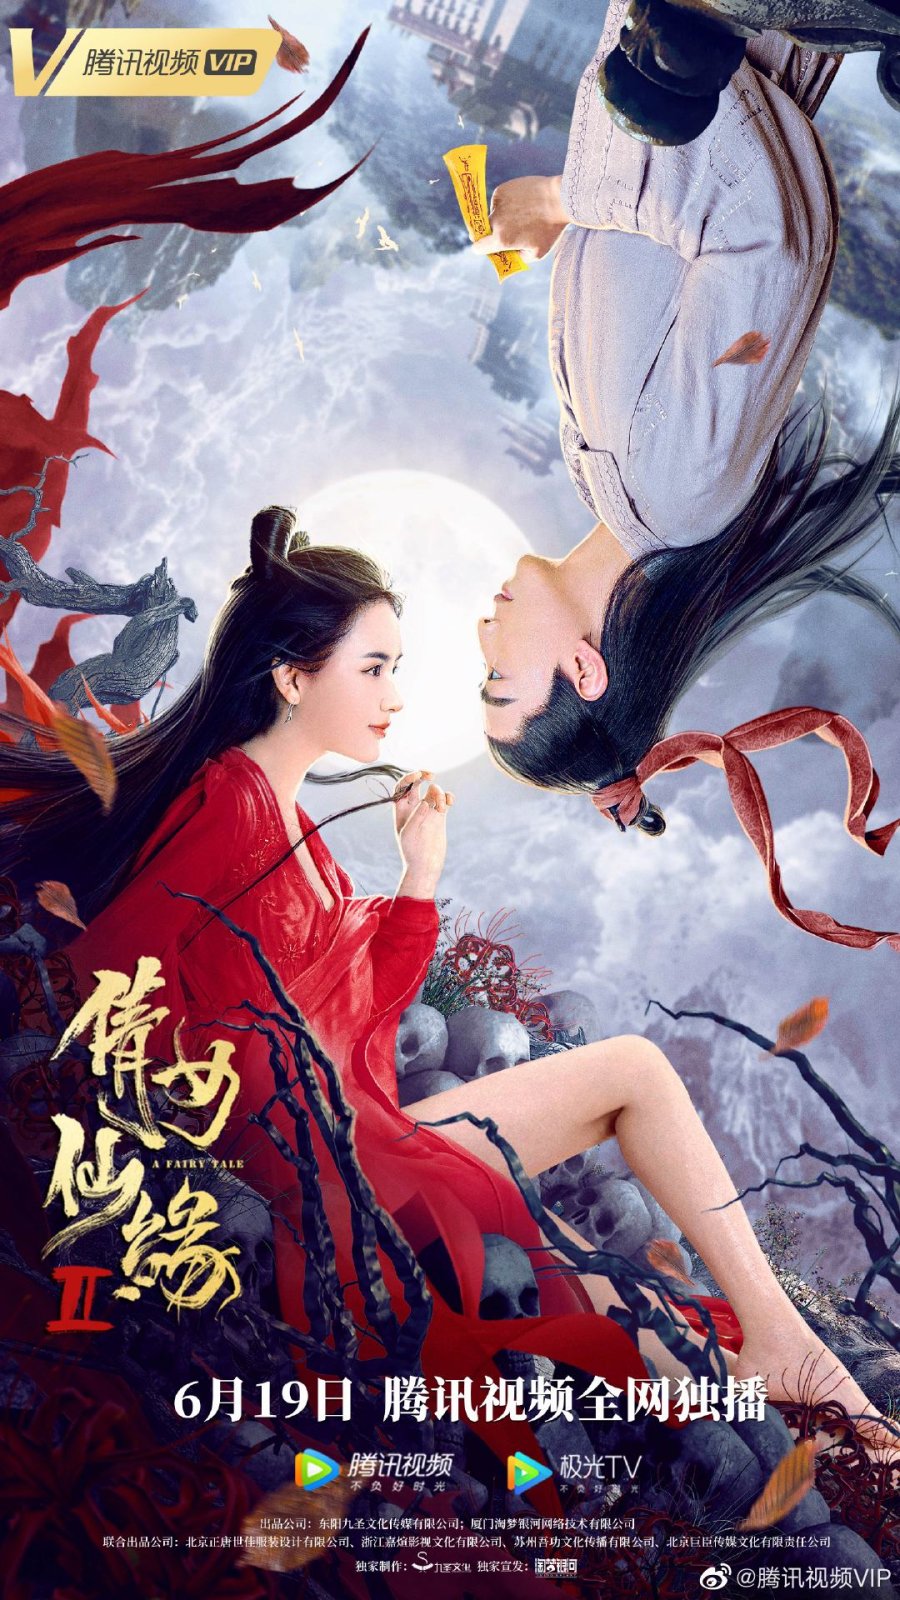 2021-c-drama-channels-created-licensed-chinese-dramas-viki-discussions